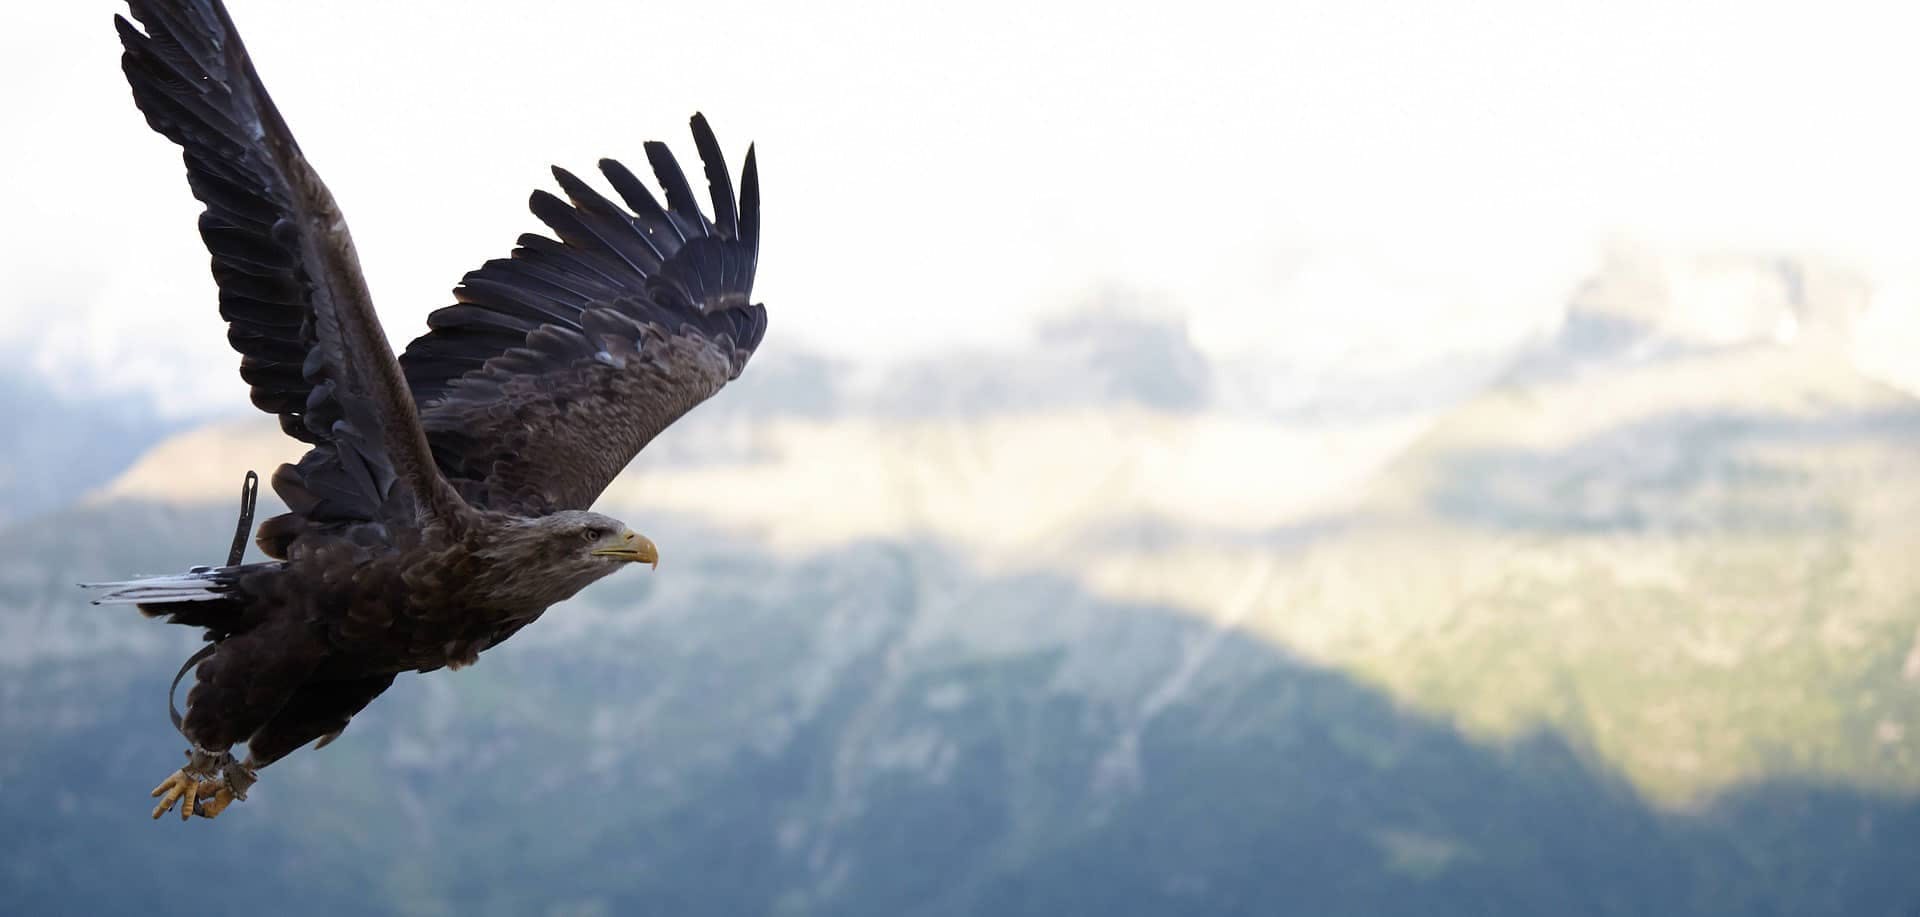 An eagle soars with wings fully extended, against a backdrop of misty mountains and a bright sky.